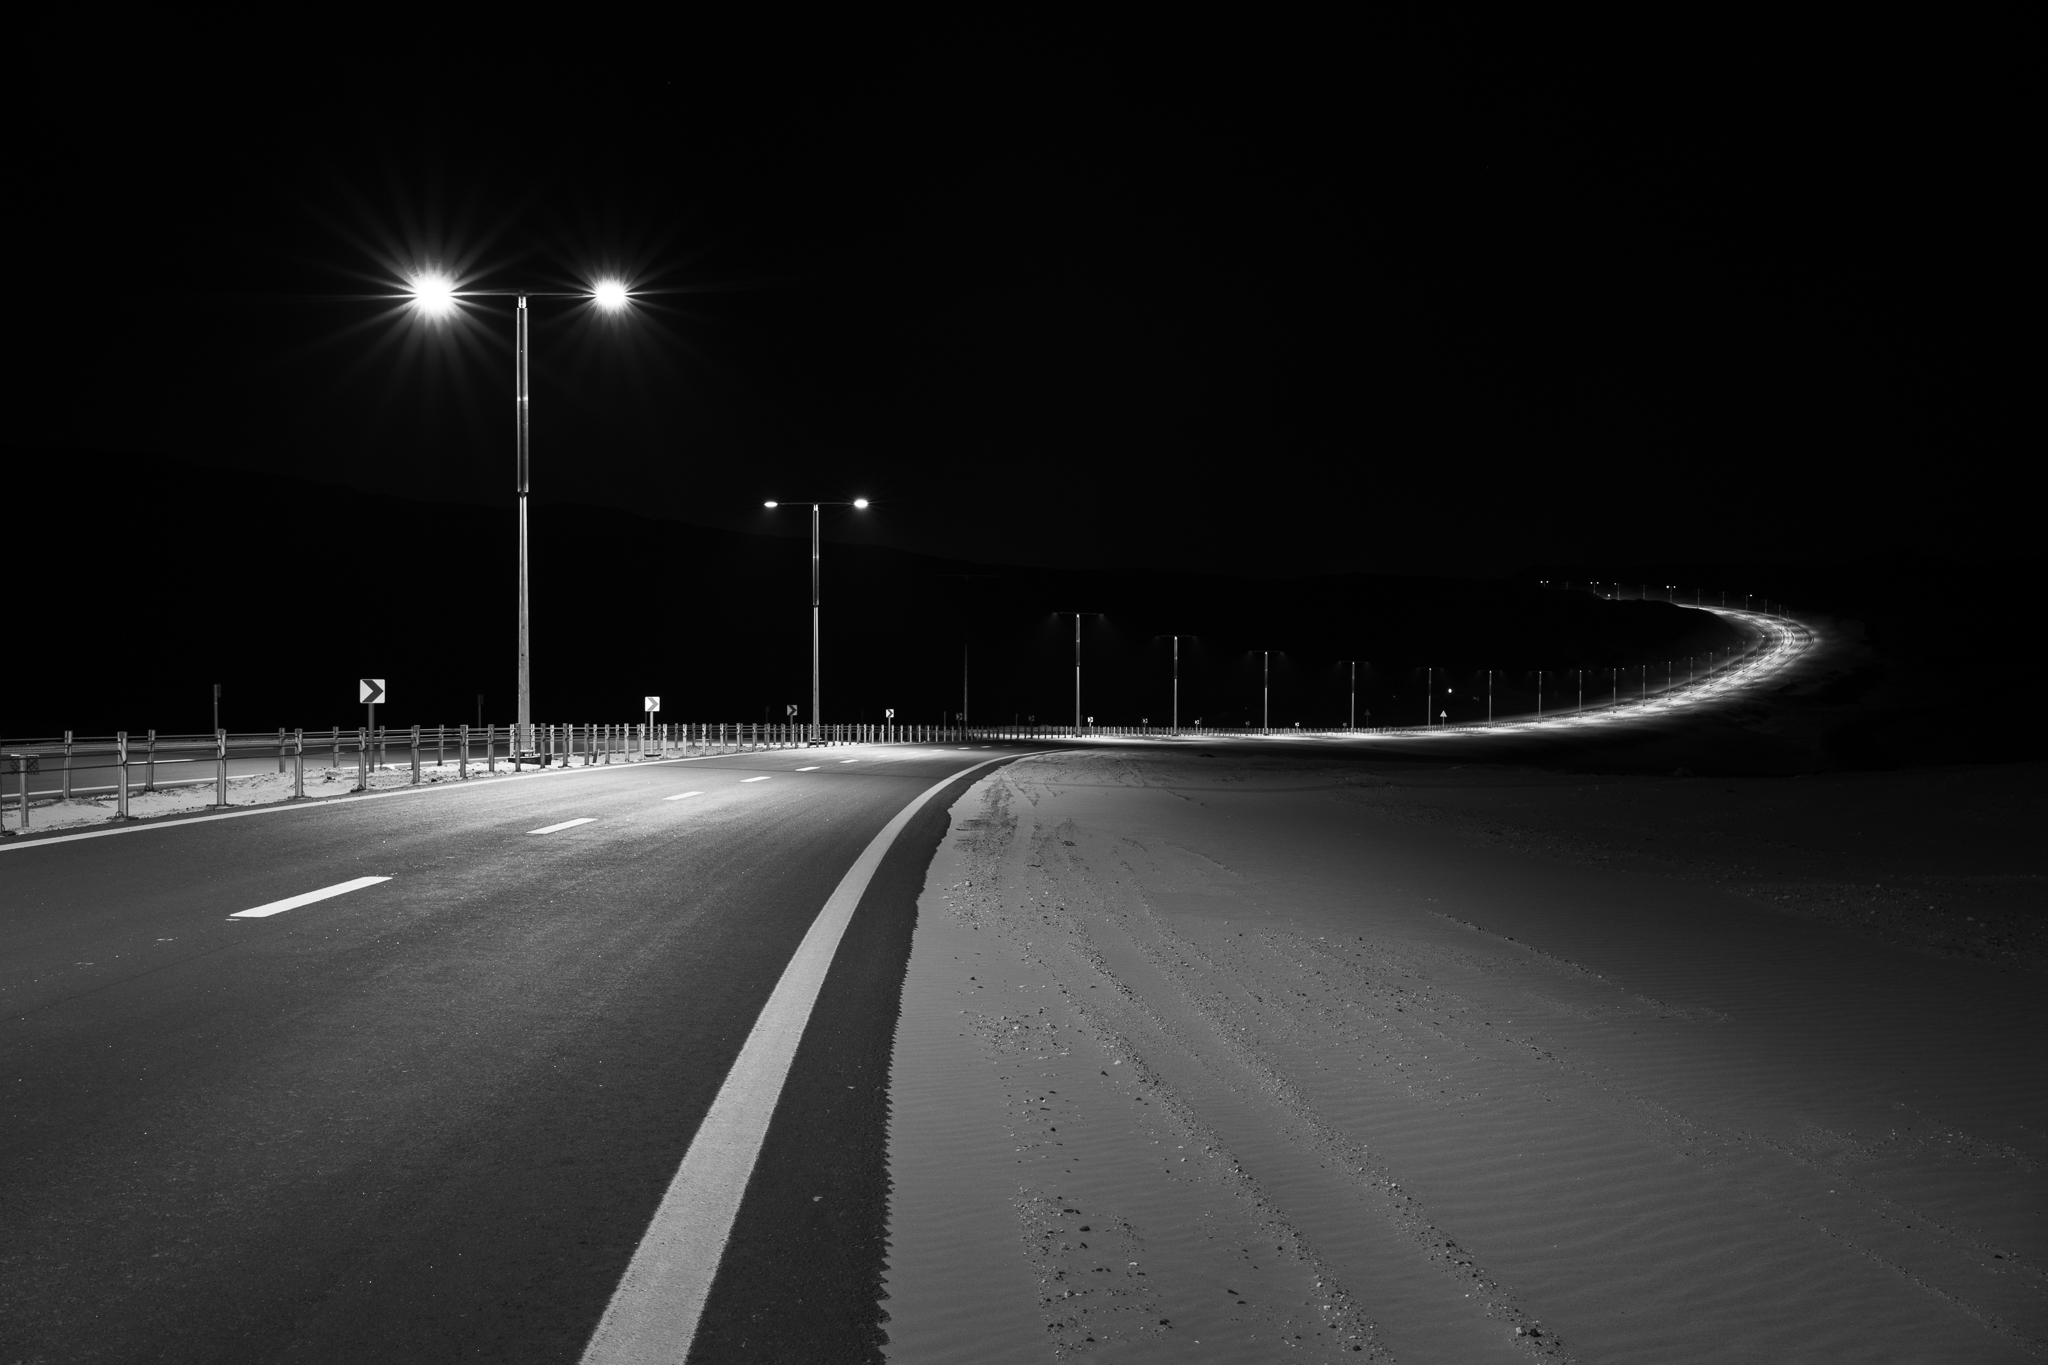 https://photographylife.com/wp-content/uploads/2022/06/Street-at-night-black-and-white-photo.jpg